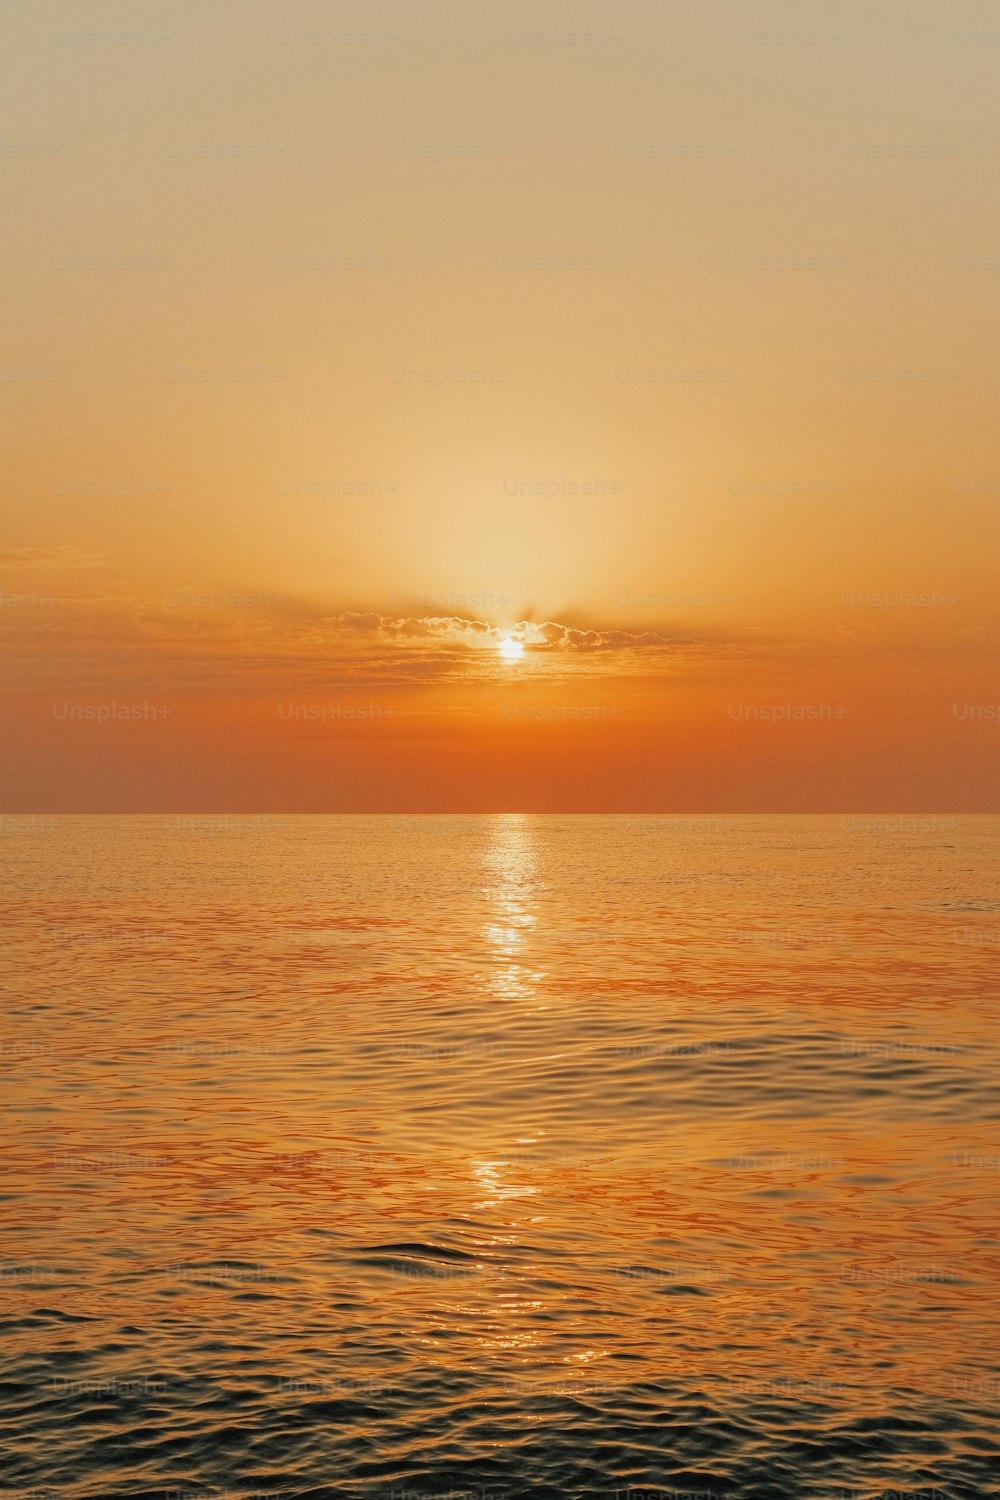 the sun is setting over the ocean on a clear day